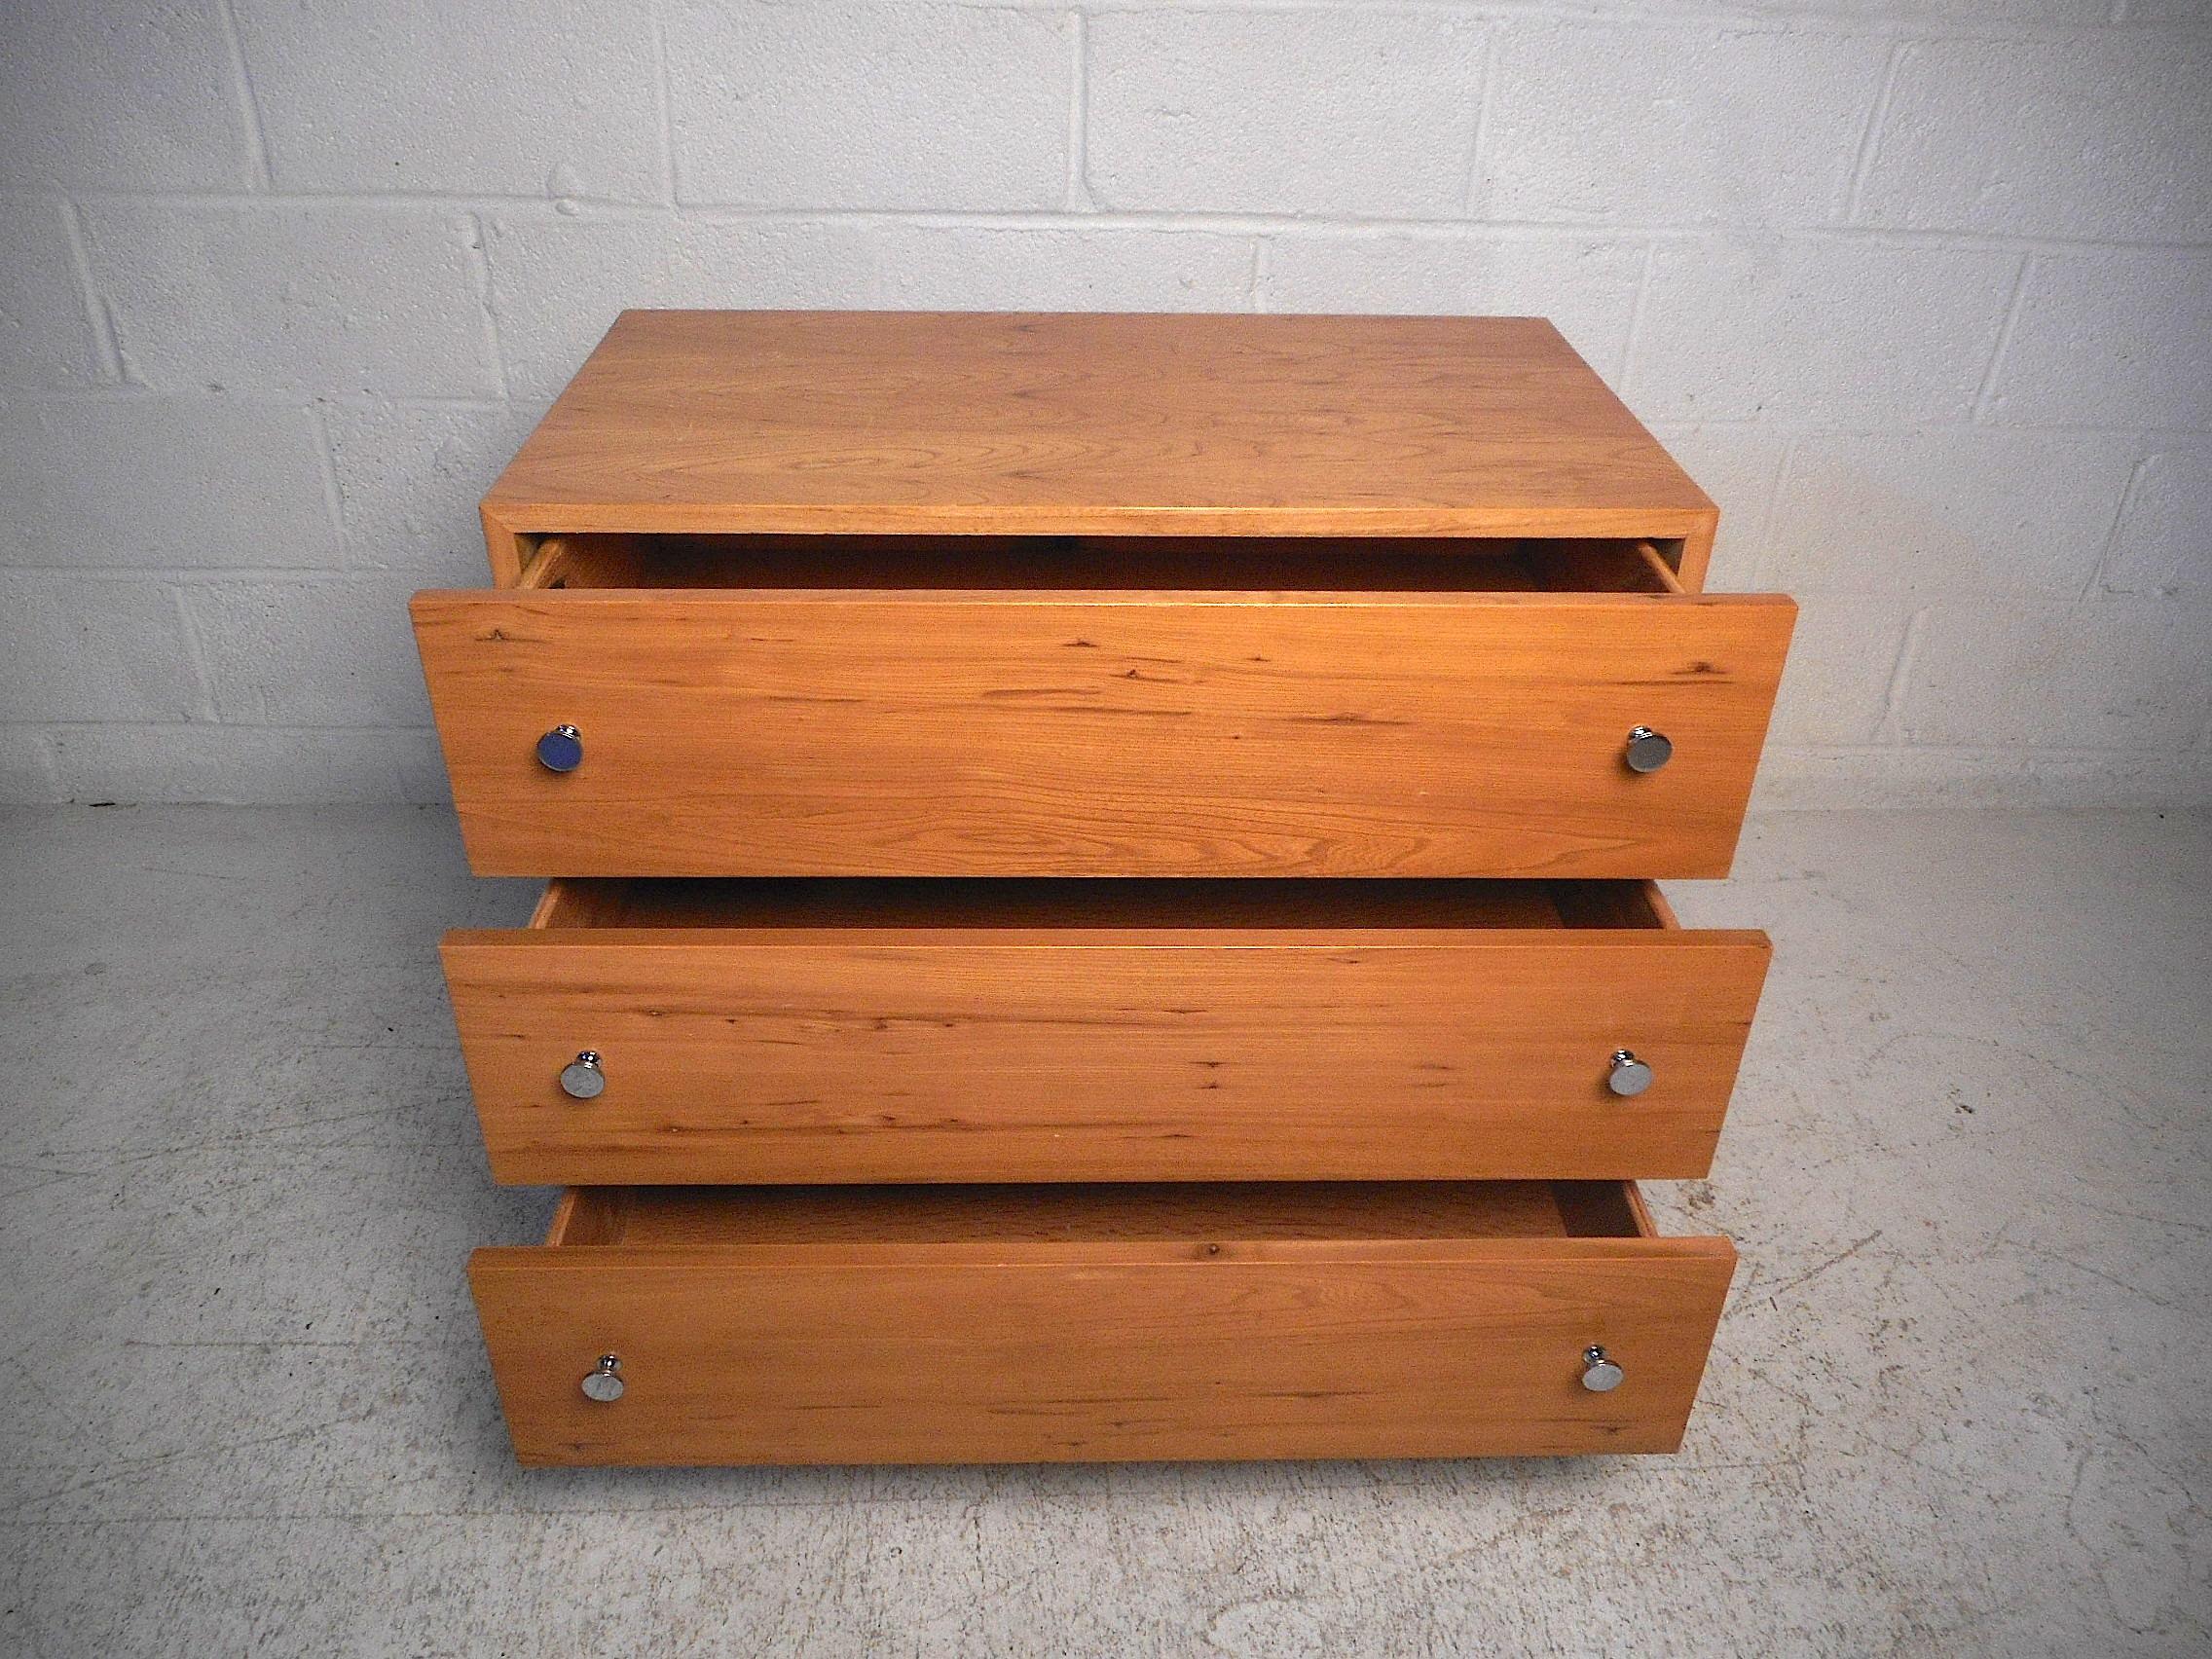 Handsome midcentury drawer chest by Milo Baughman. Maple wood, polished chrome base and drawer pulls. A great addition to any modern interior. Item location: Brooklyn NY